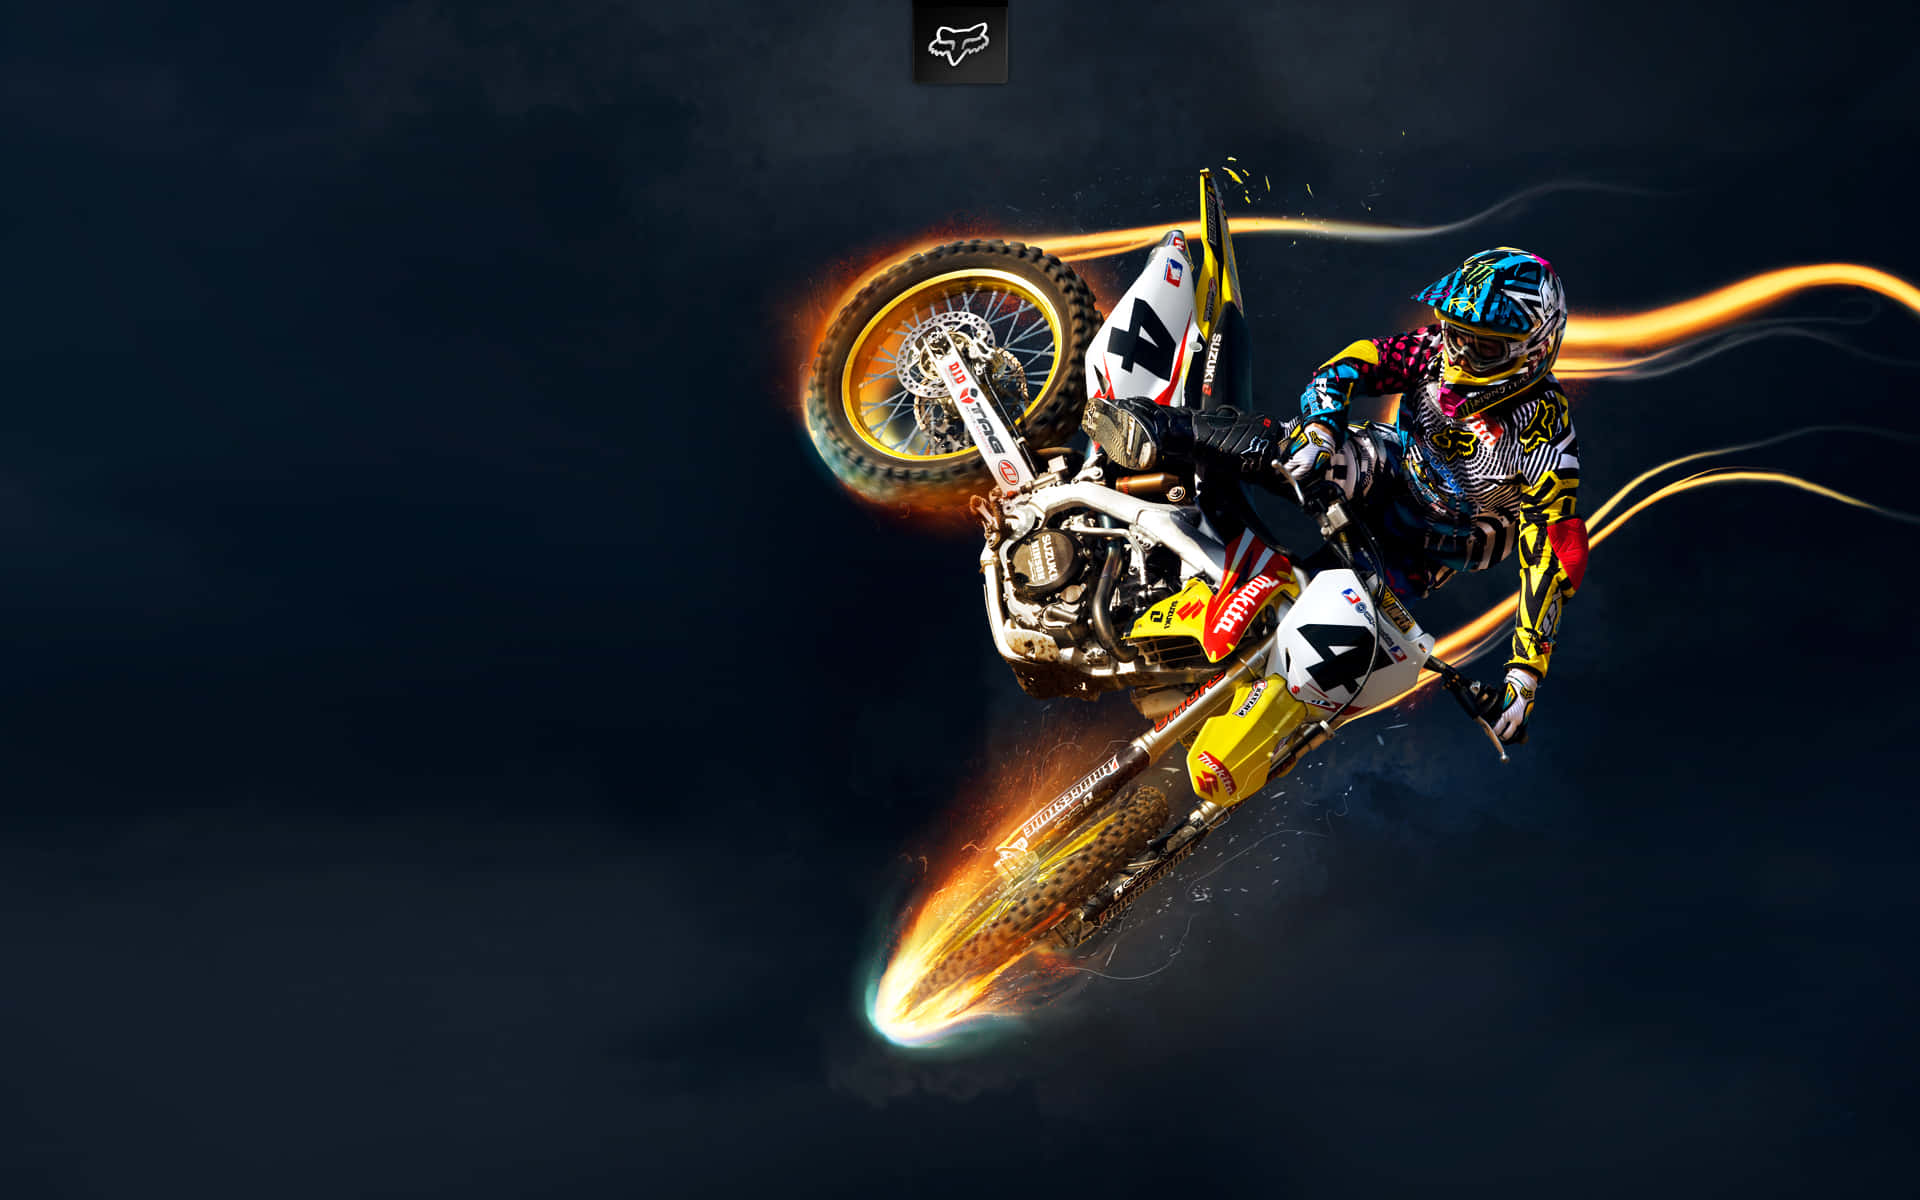 Motocross Rider Jumping High in the Air